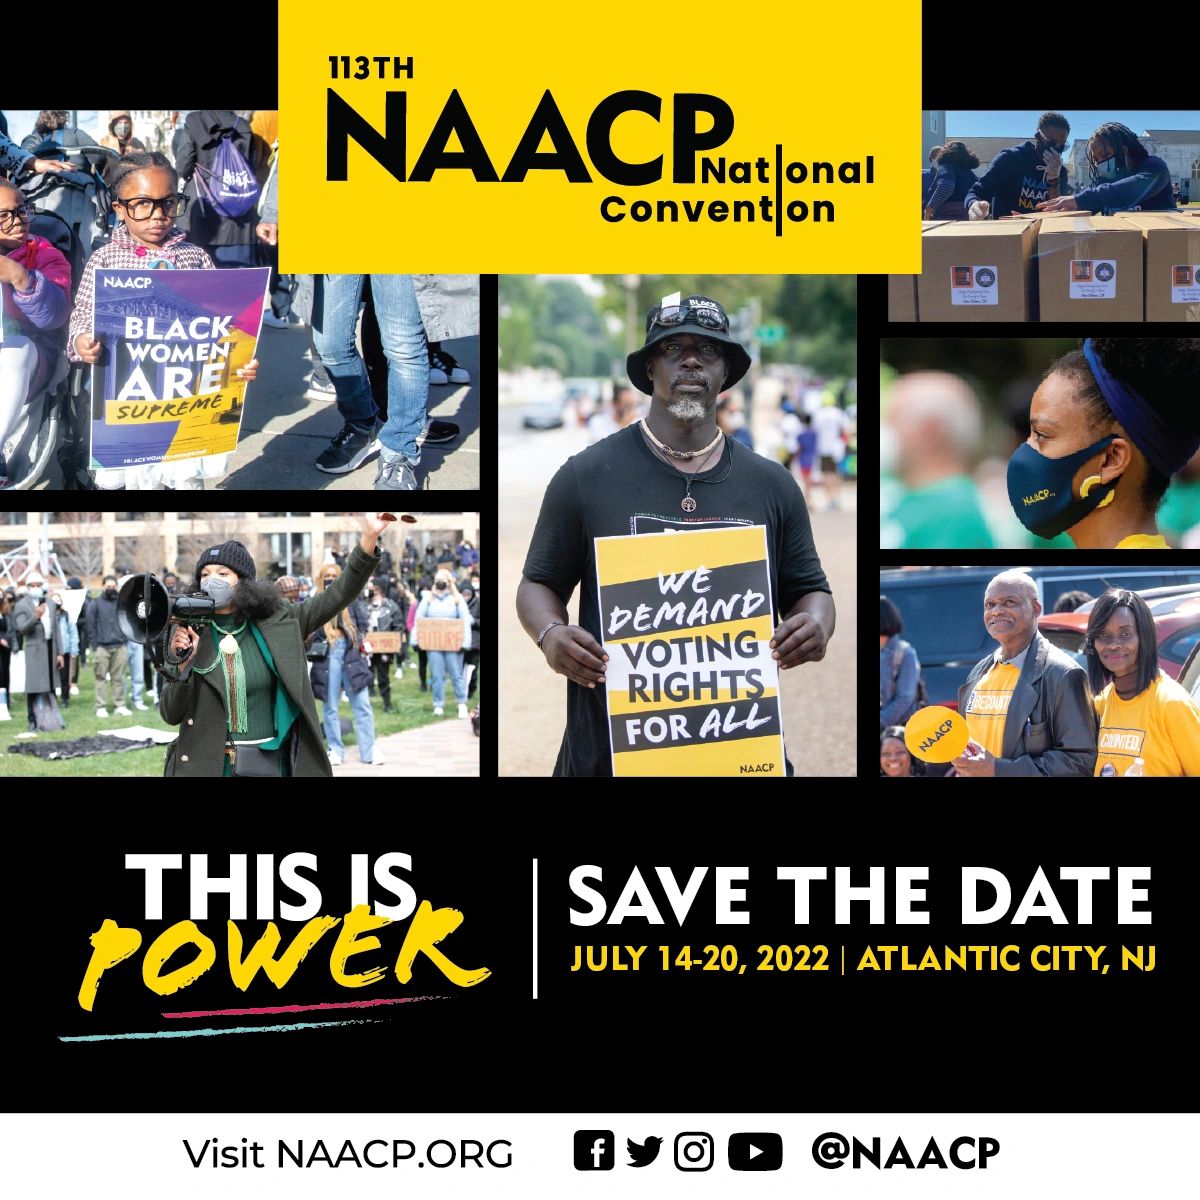 SAVE THE DATE 113th NAACP National Convention